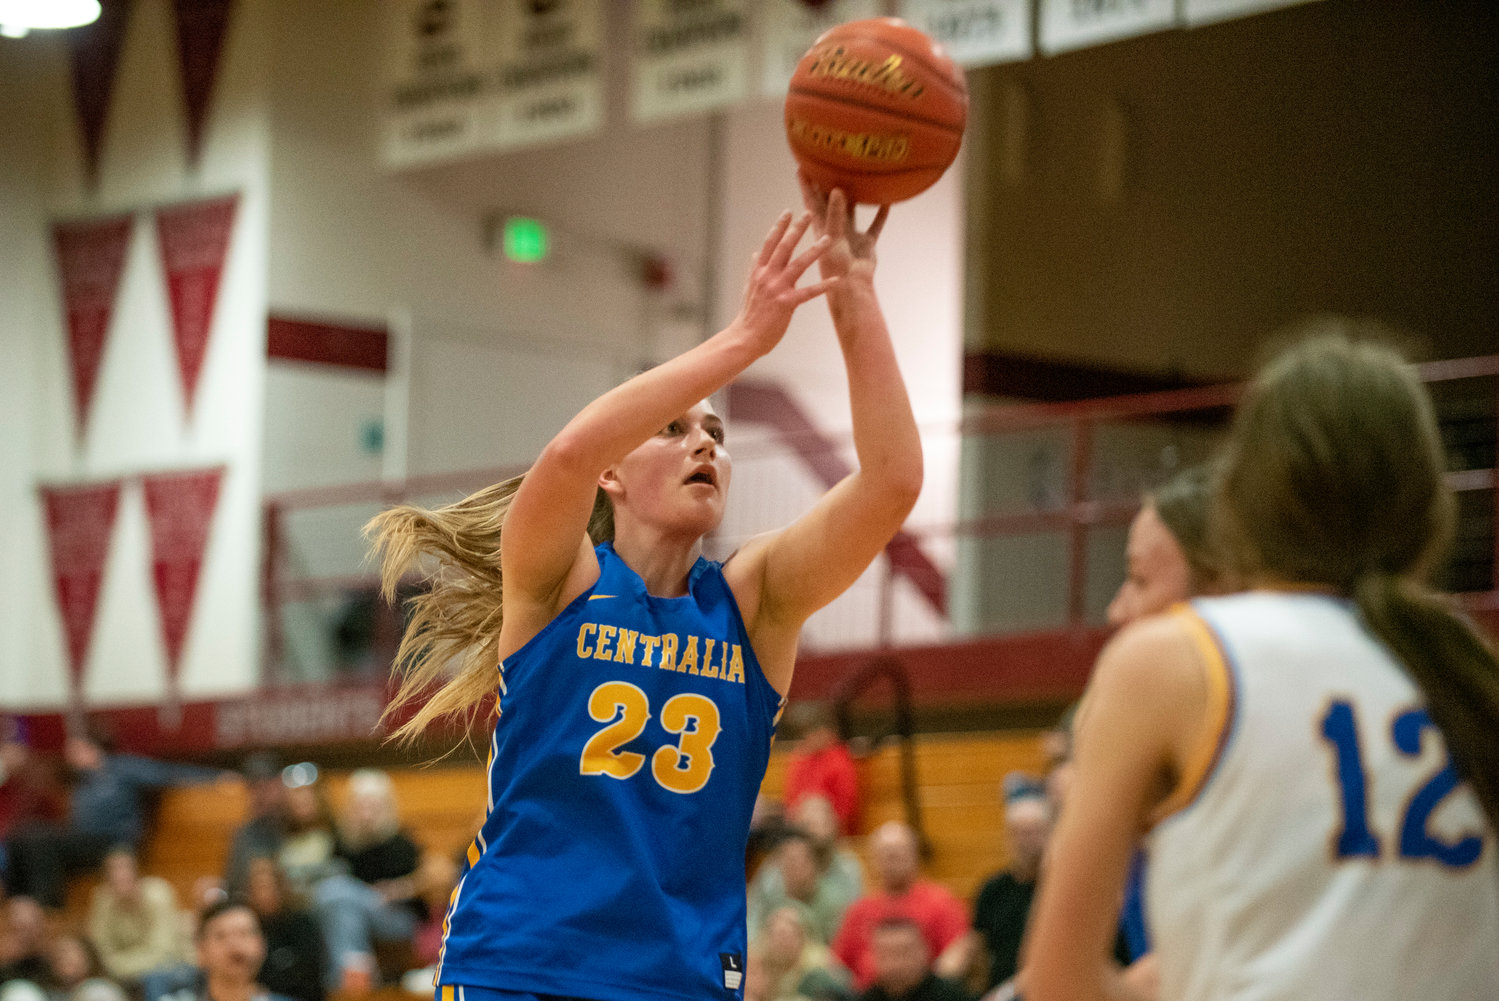 Winlock's Addison Hall (23) shoots a jumper during the SWW Senior All-Star Game on March 26.